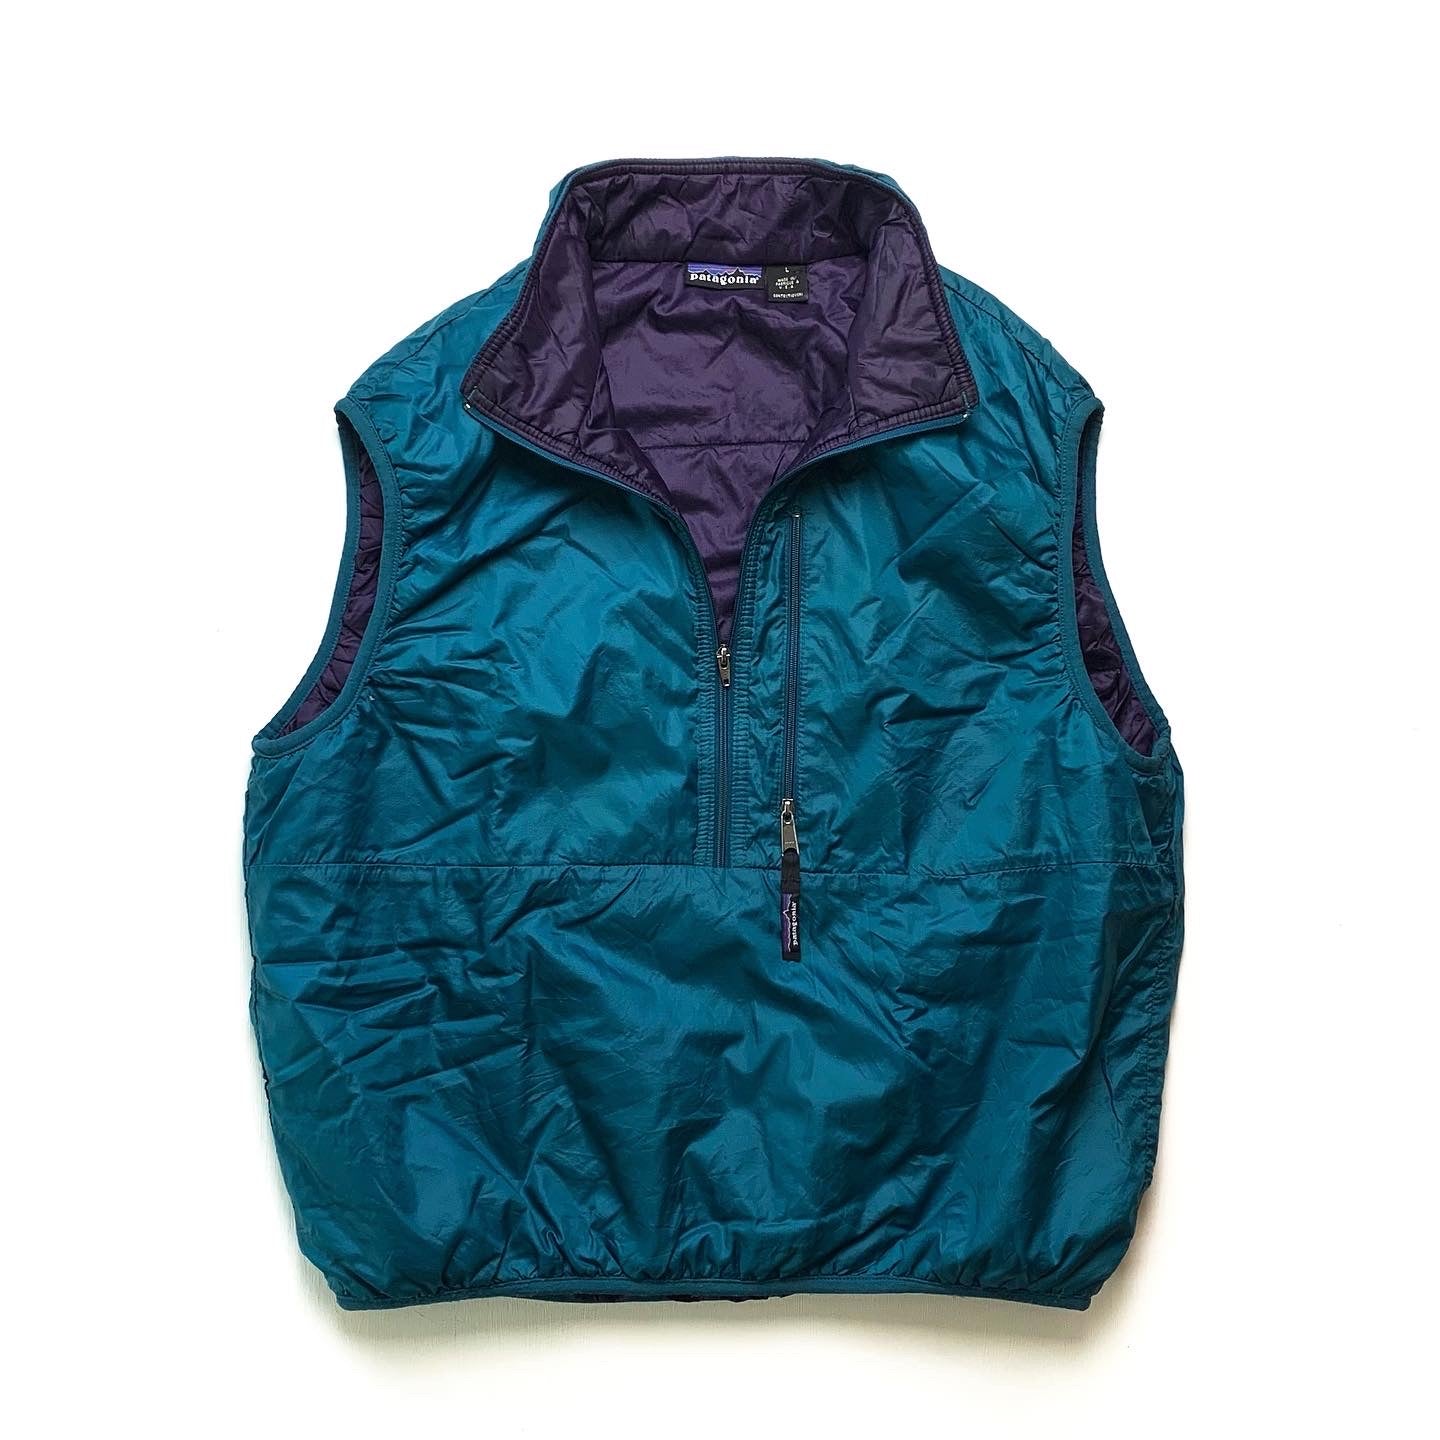 SP'96 Patagonia Puffball Vest, Teal/Purple (L)